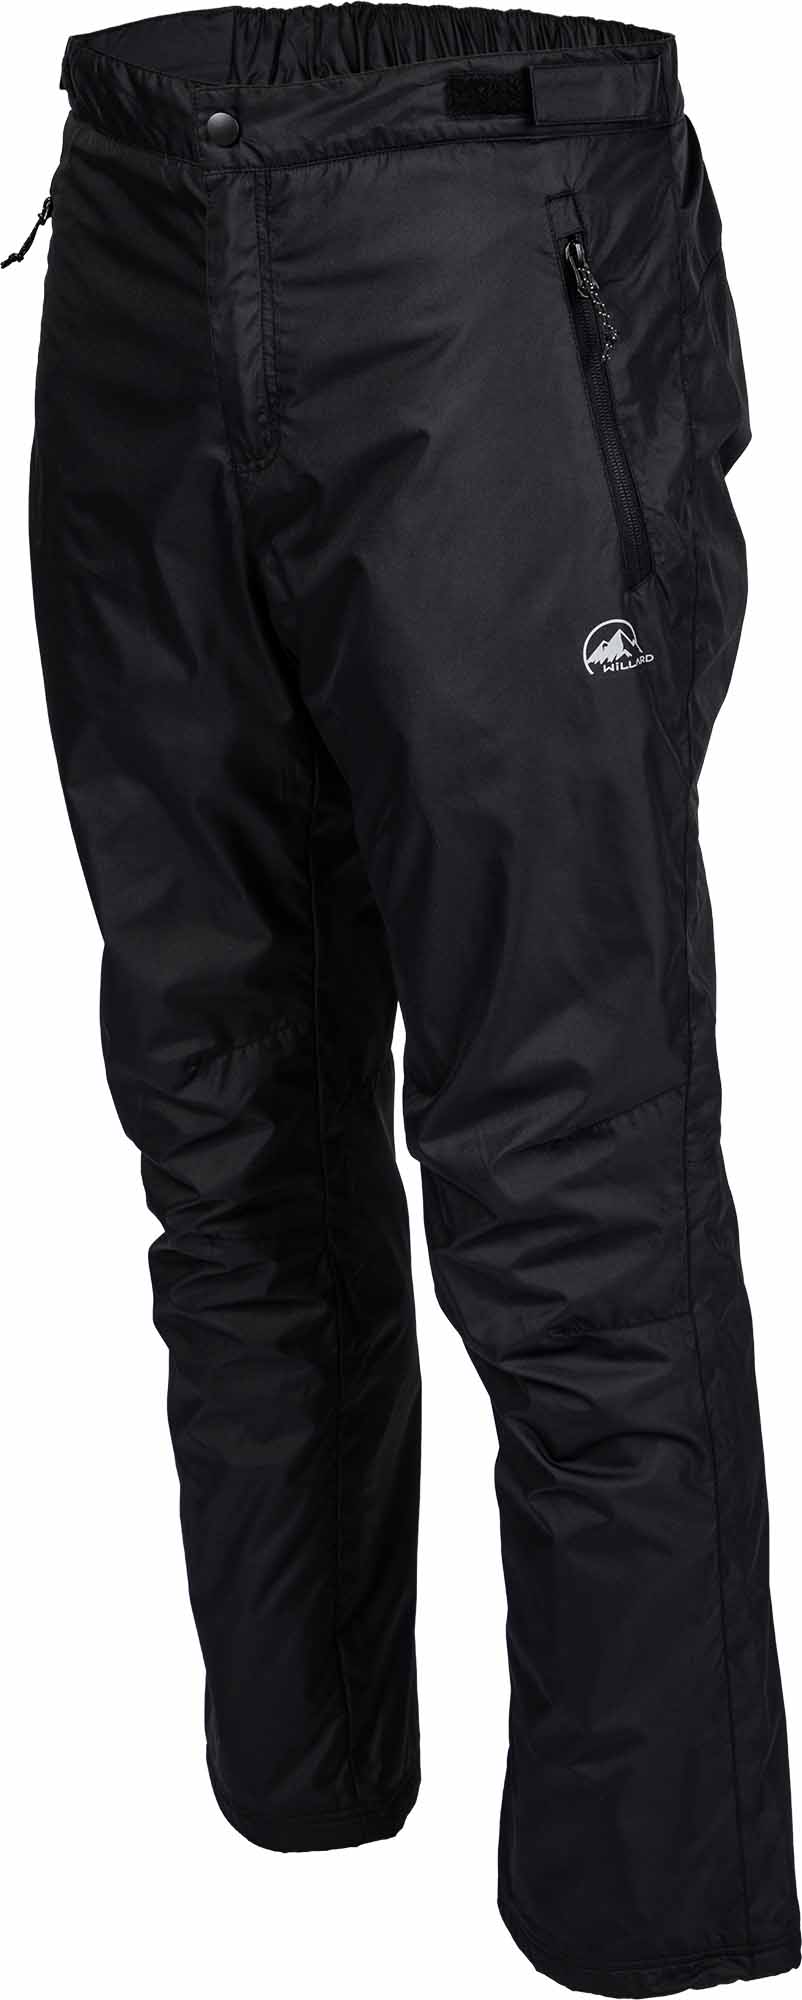 Men’s insulated trousers